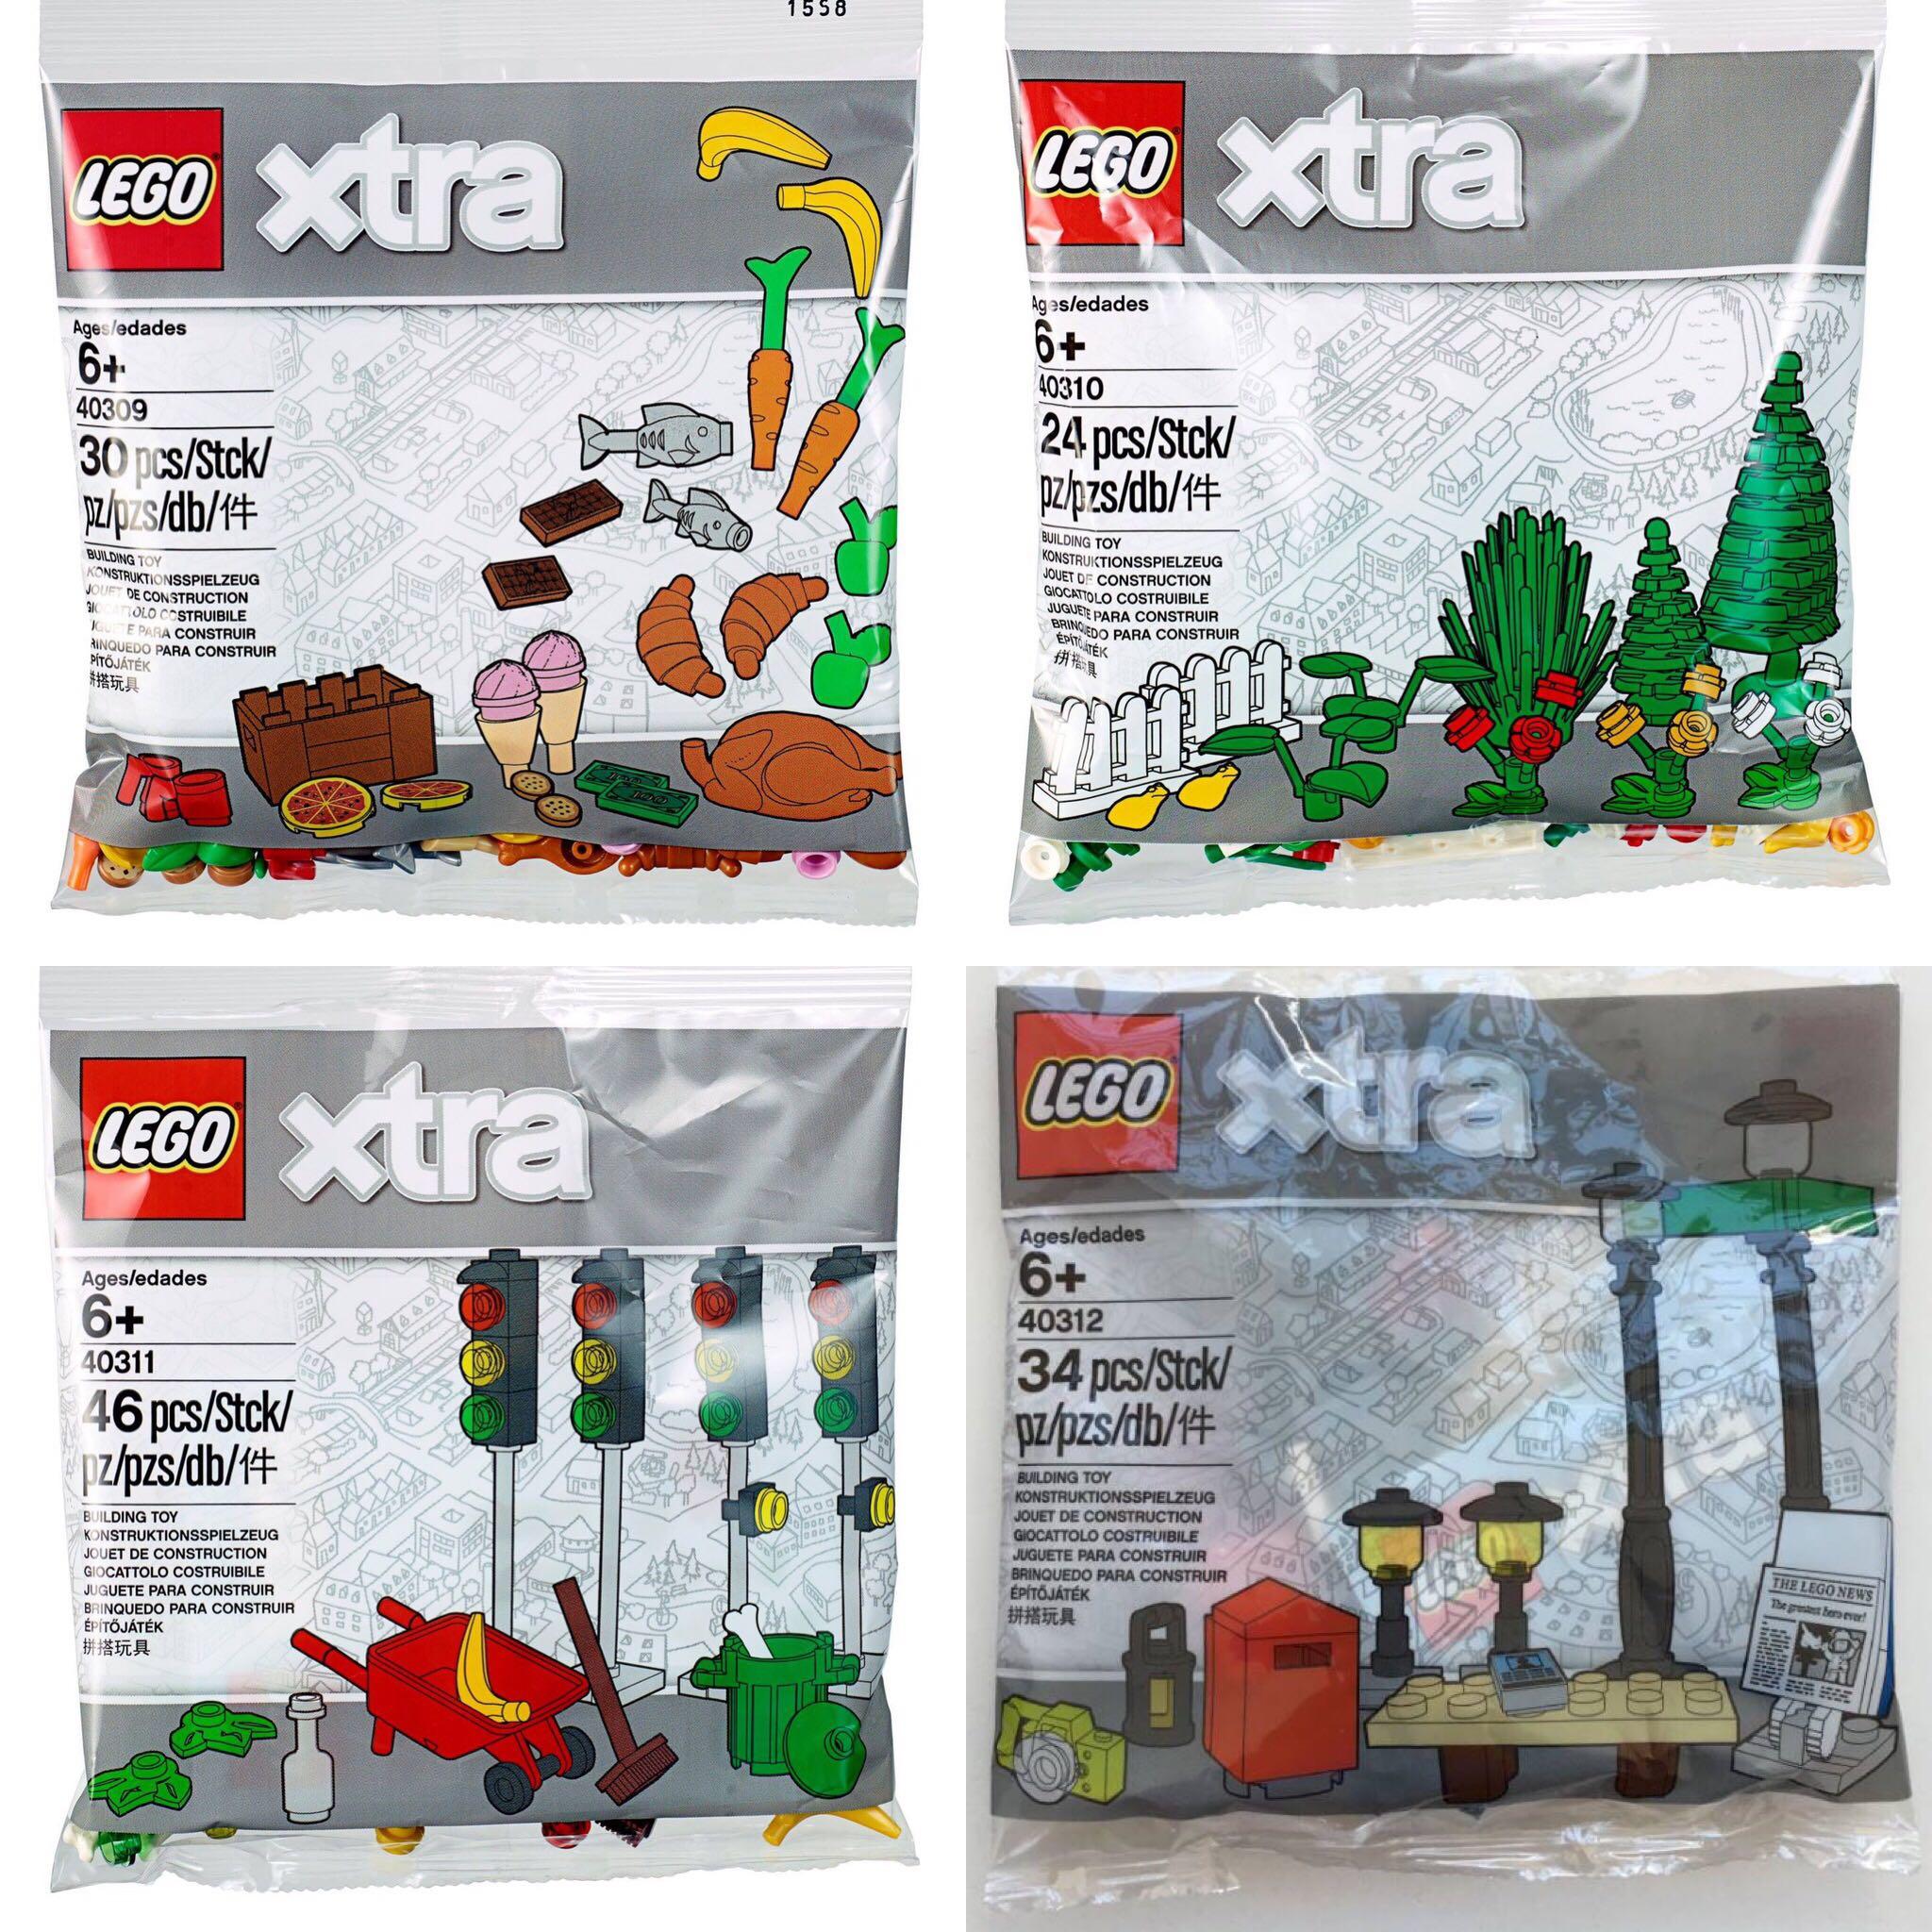 Polybag Lego Xtra 40312 New /& Sealed Street Lamps /&  Accessories